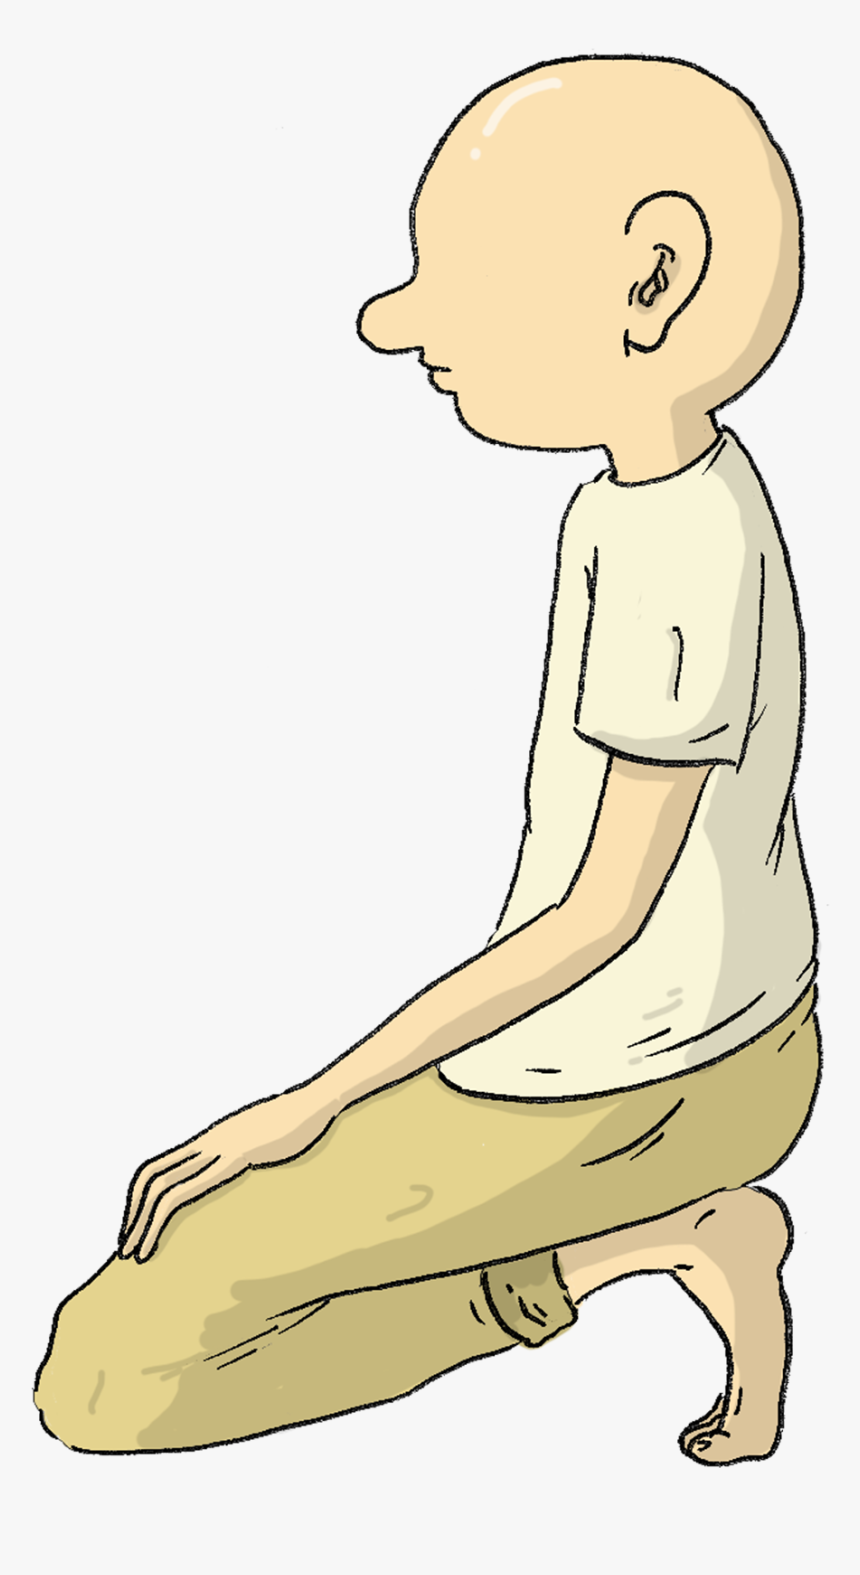 Jenk Stretch - Sit On Knees Cartoon, HD Png Download, Free Download